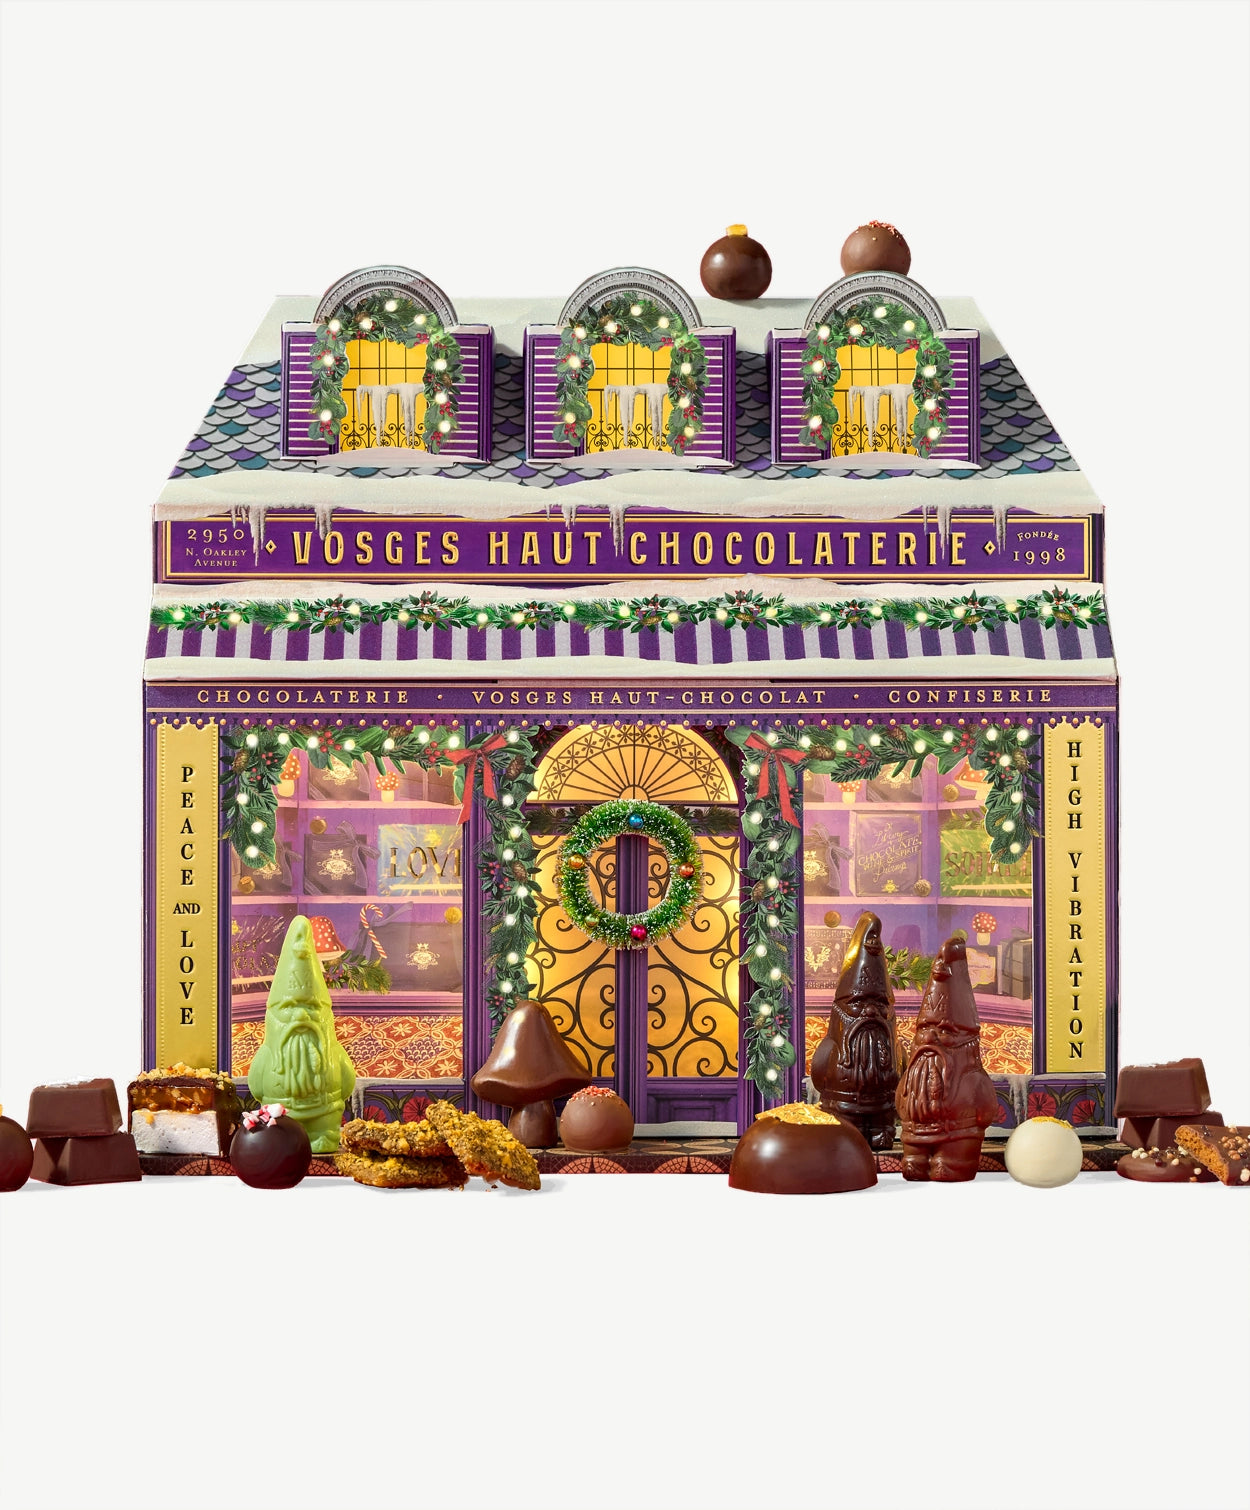 A Vosges Chocolate advent calendar decorated to resemble a small chocolaterie, adorned in christmas lights and greens sits surrounded by chocolate bonbons and gnomes on a light grey background.